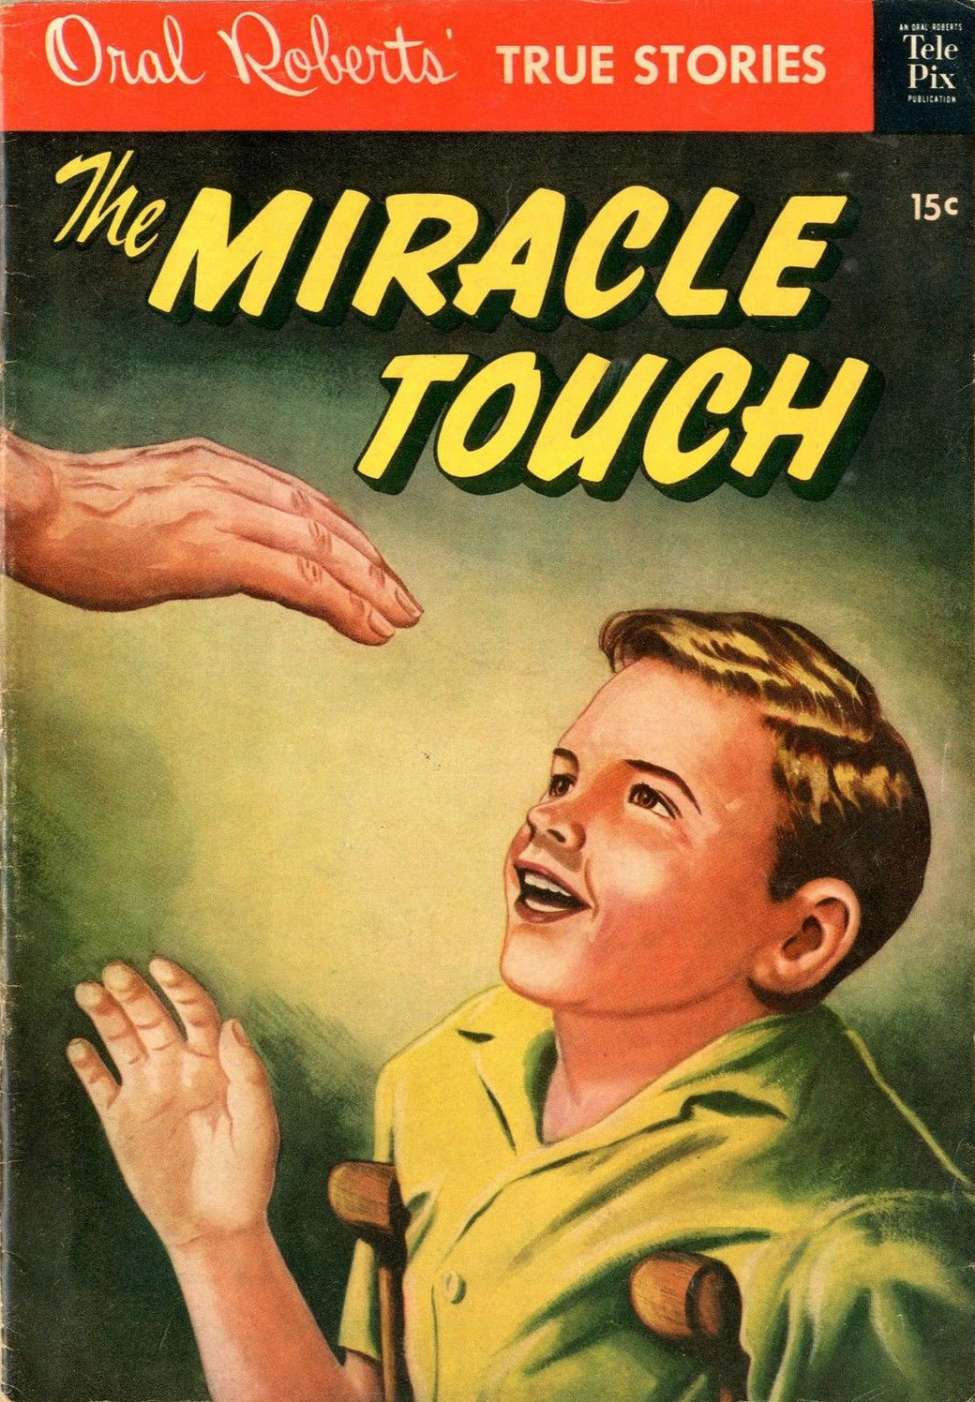 Book Cover For Oral Roberts' True Stories 101 - The Miracle Touch